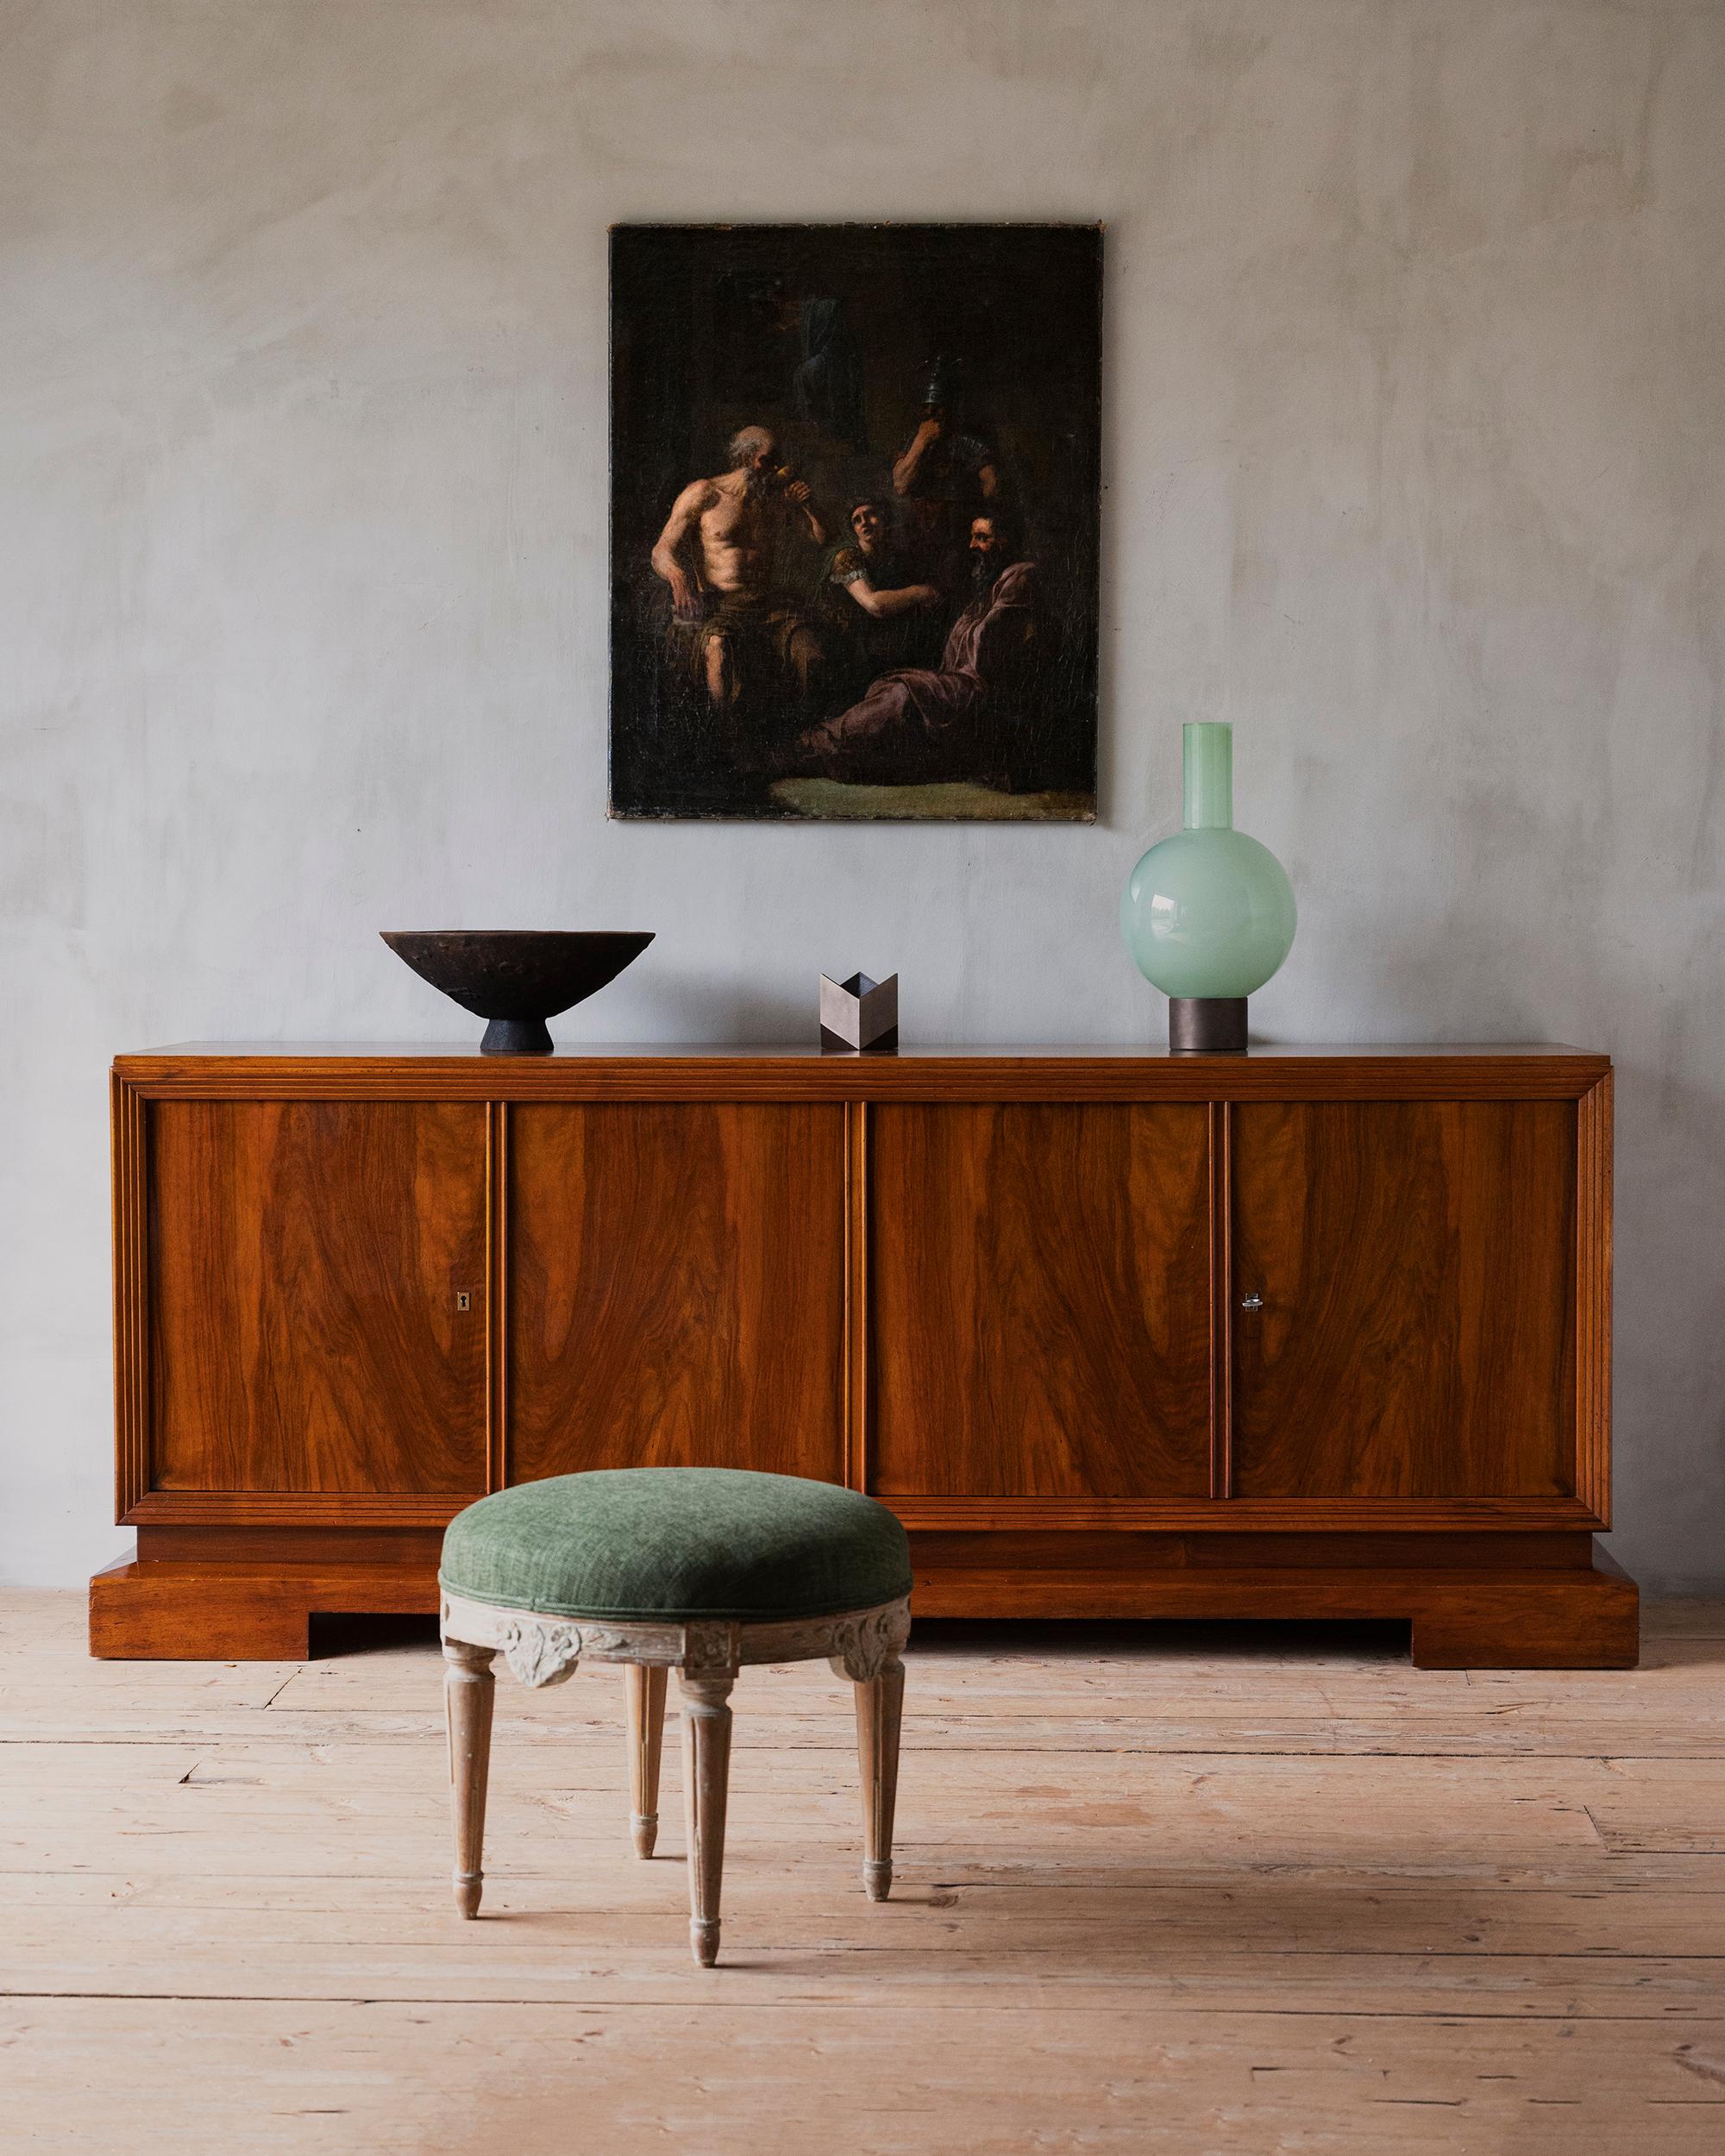 Rare early 1940s Swedish Modern mahogany sideboard with five drawers and shelves in the interior. Attributed to Carl Cederholm for Stil och Form. 

Carl Cederholm (b. 1909) graduated from HKS, Tekniska Skolan, now Faculty of Arts in 1940 after three